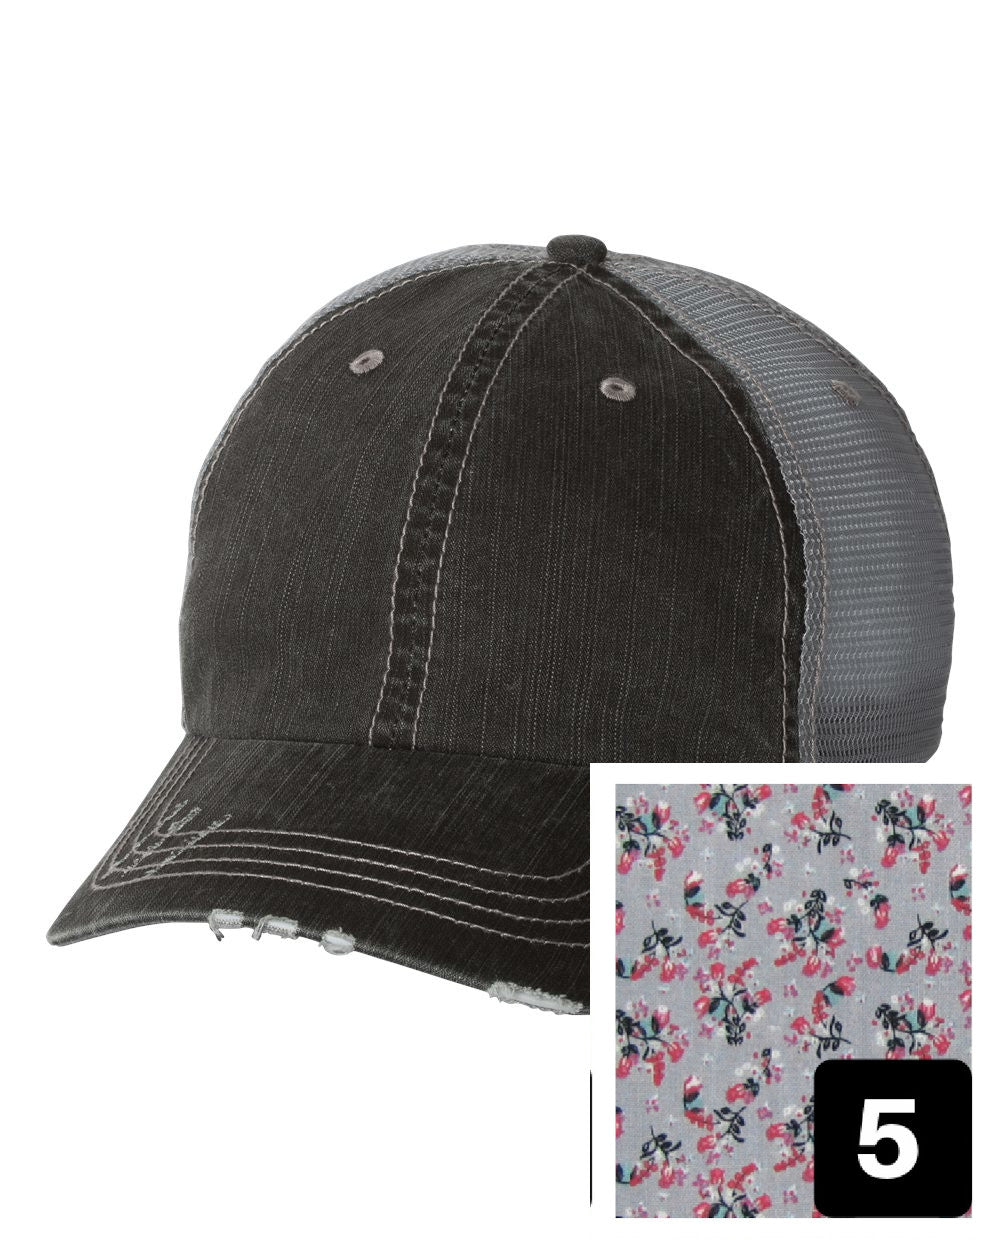 gray distressed trucker hat with purple and pink floral fabric state of UP of Michigan